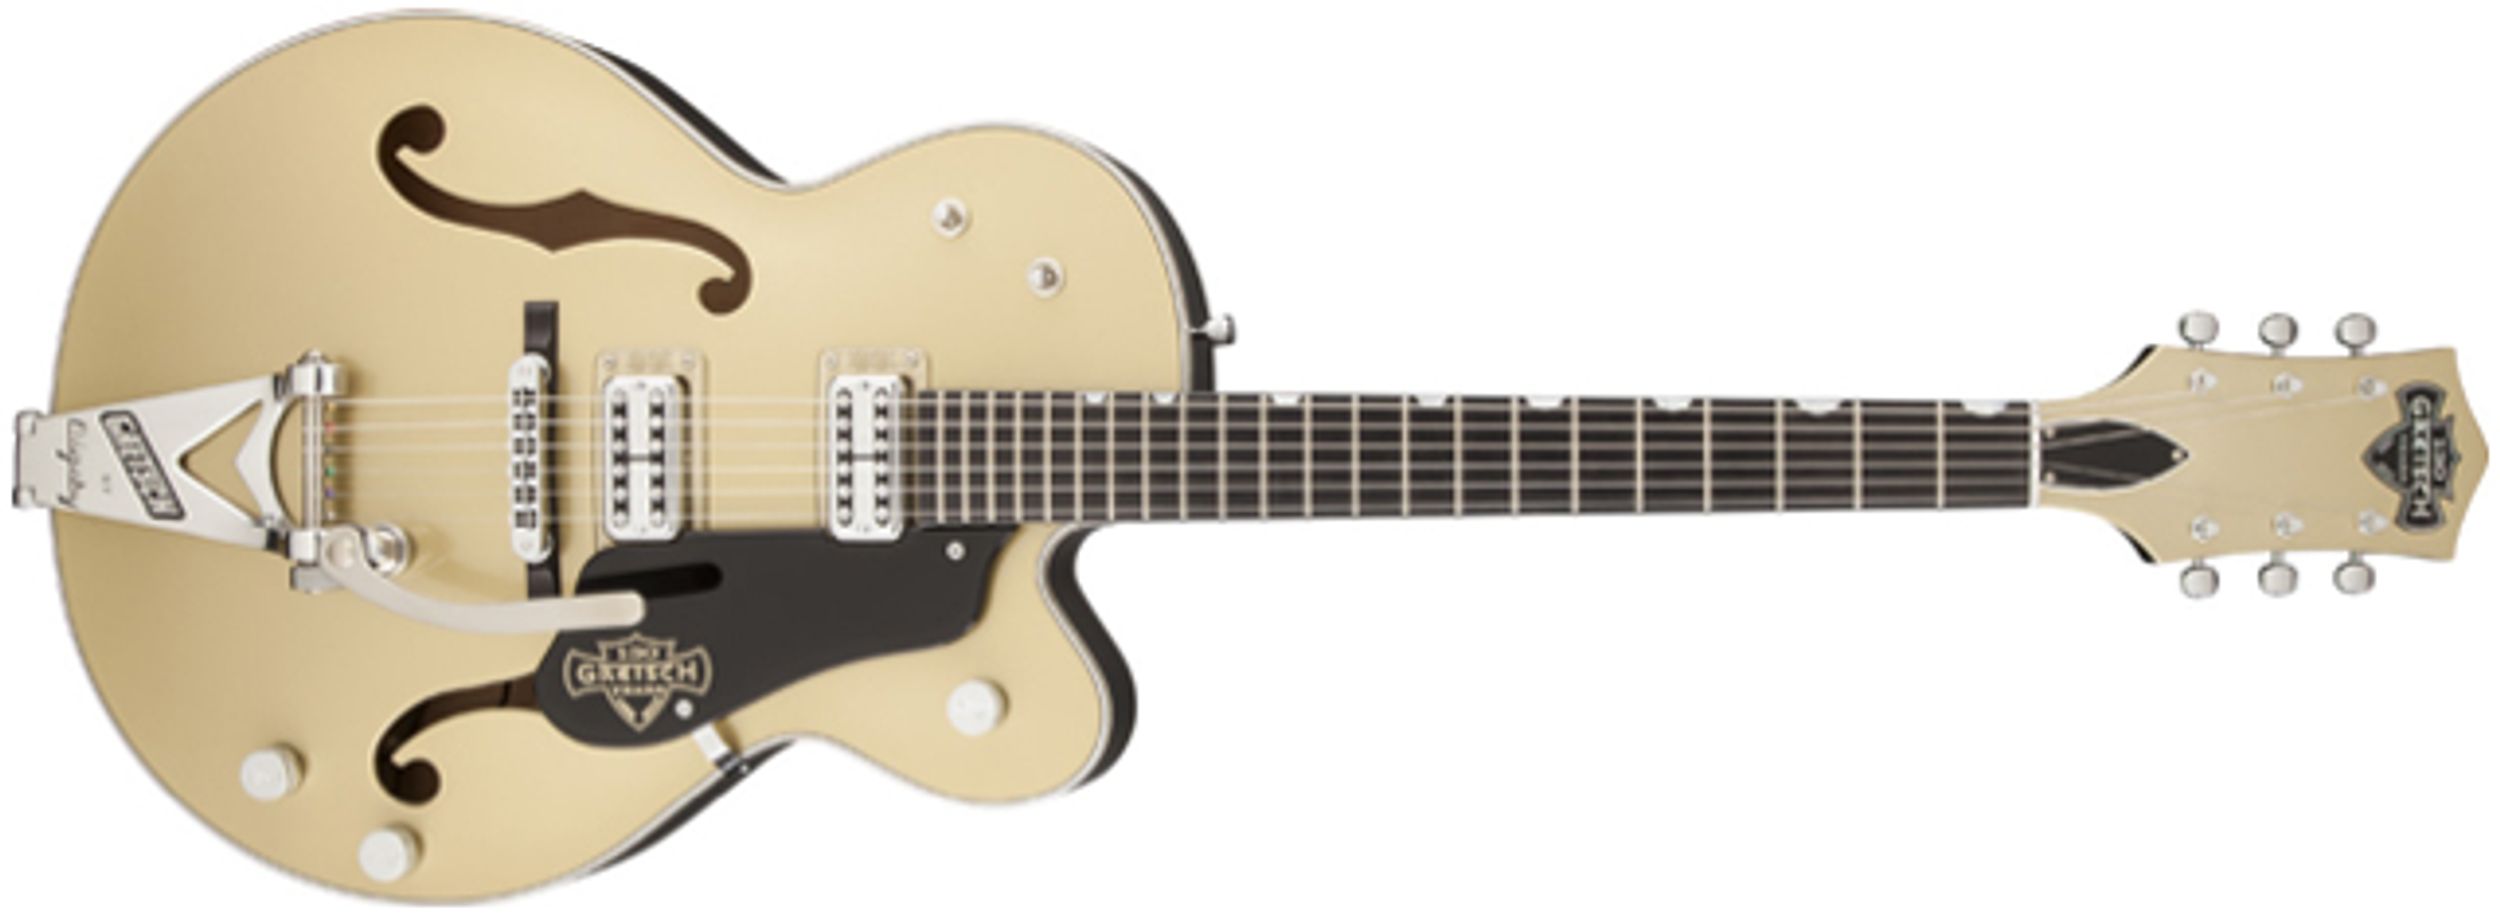 Gretsch Introduces the Custom Shop G6118T 130th Anniversary Electric Guitar